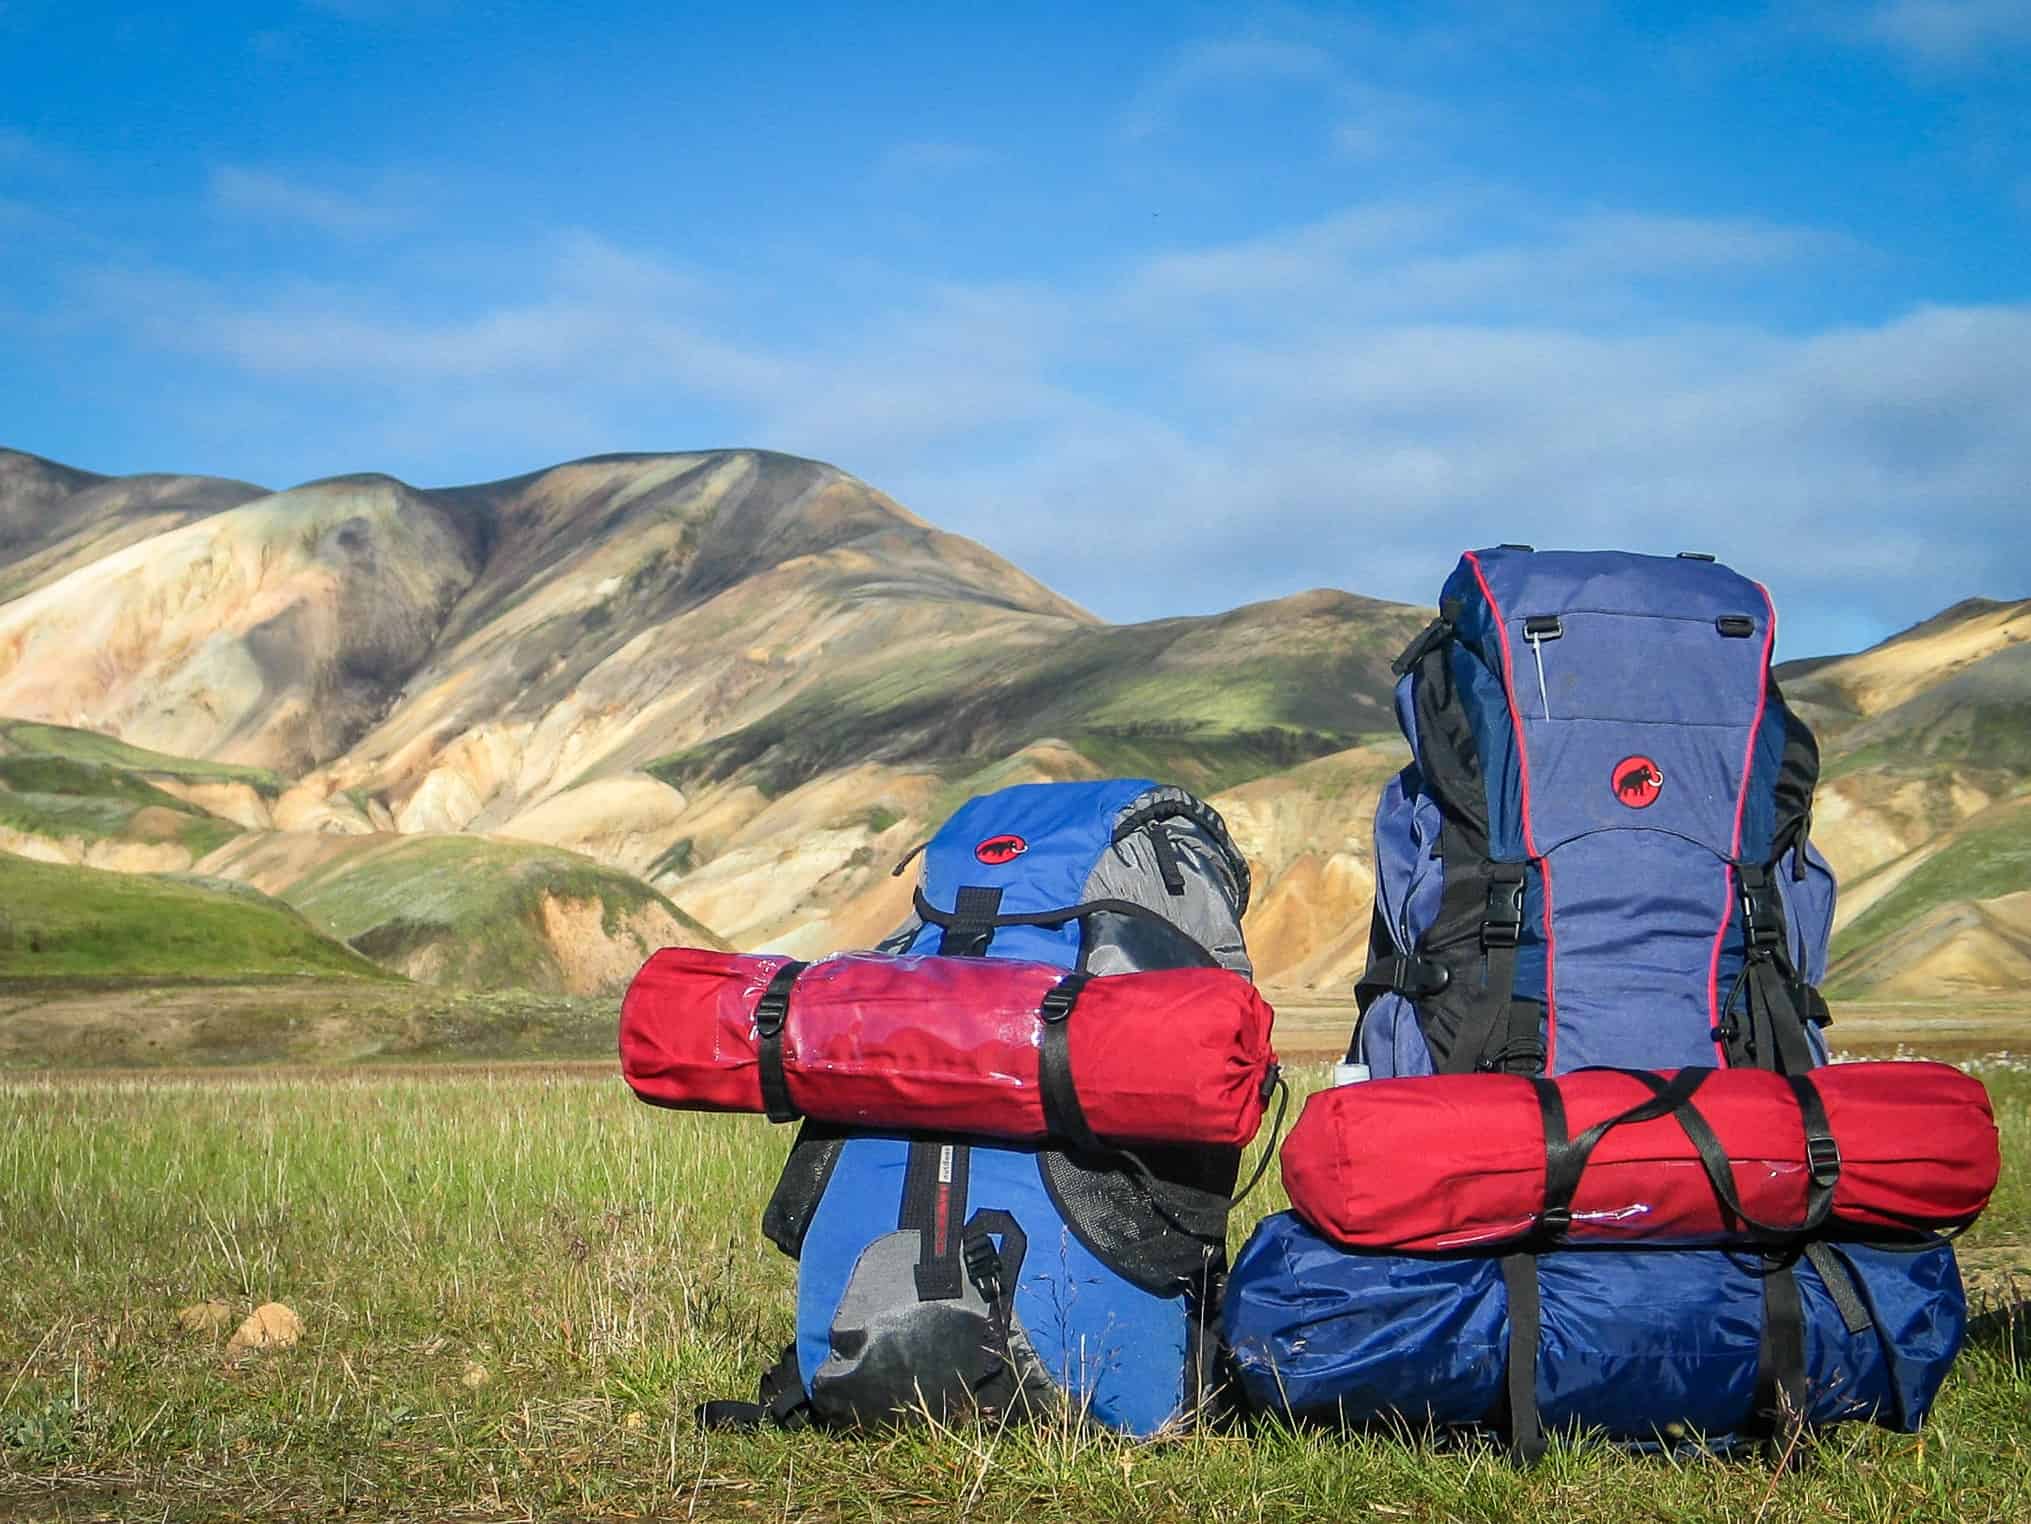 Two hiking backpacks with sleeping bags on the grassy ground